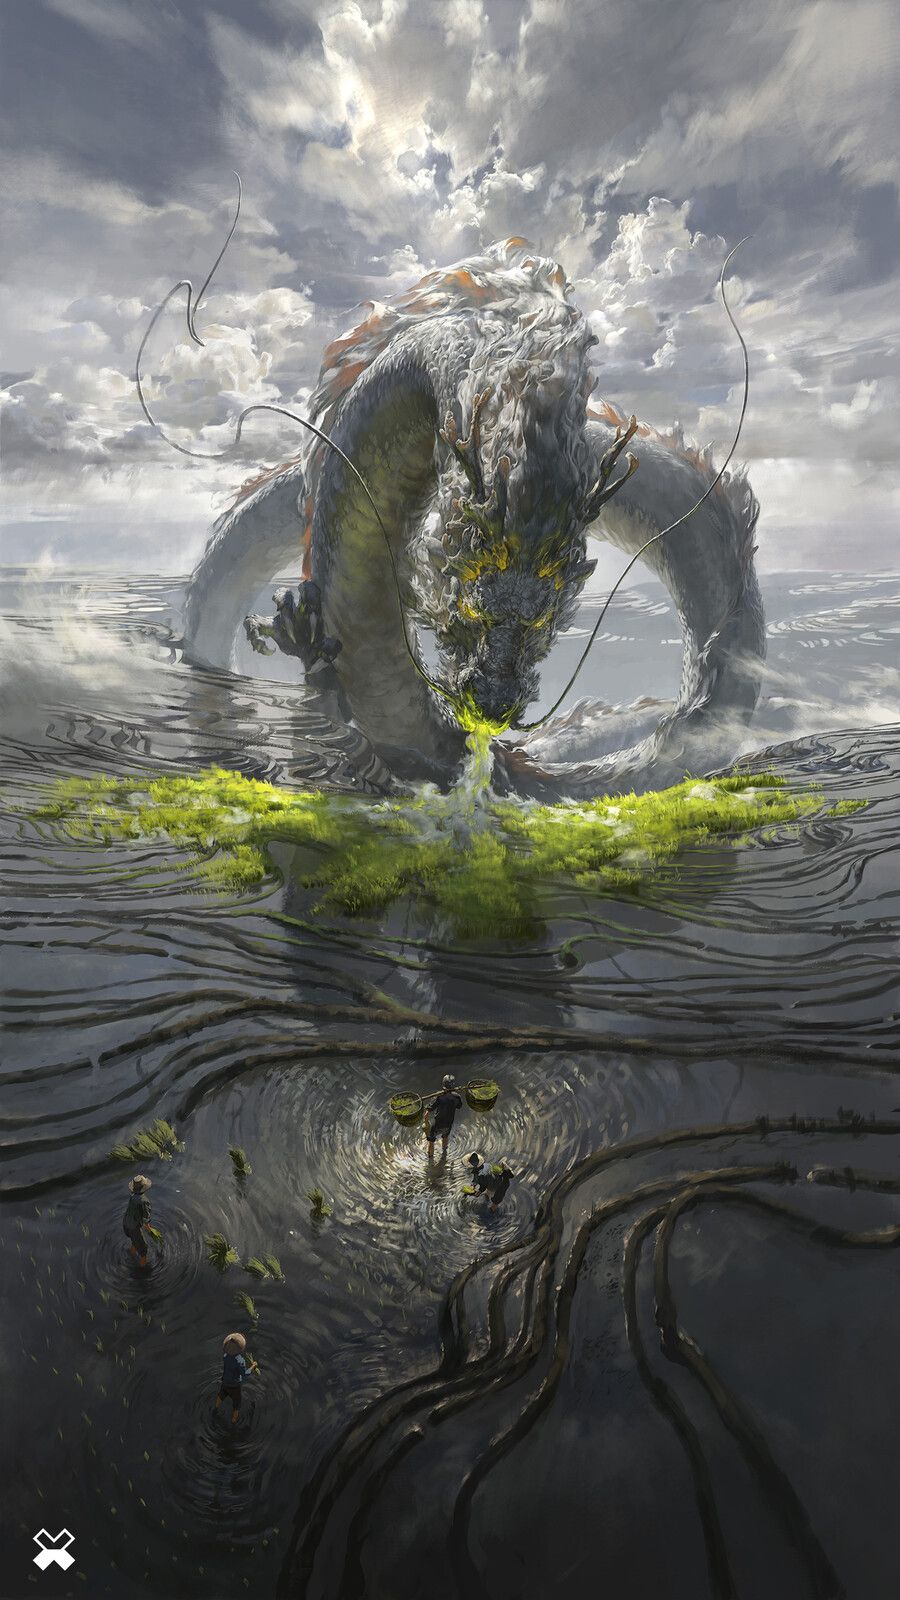 Chinese Dragon & Terrace P1, Xision Wu